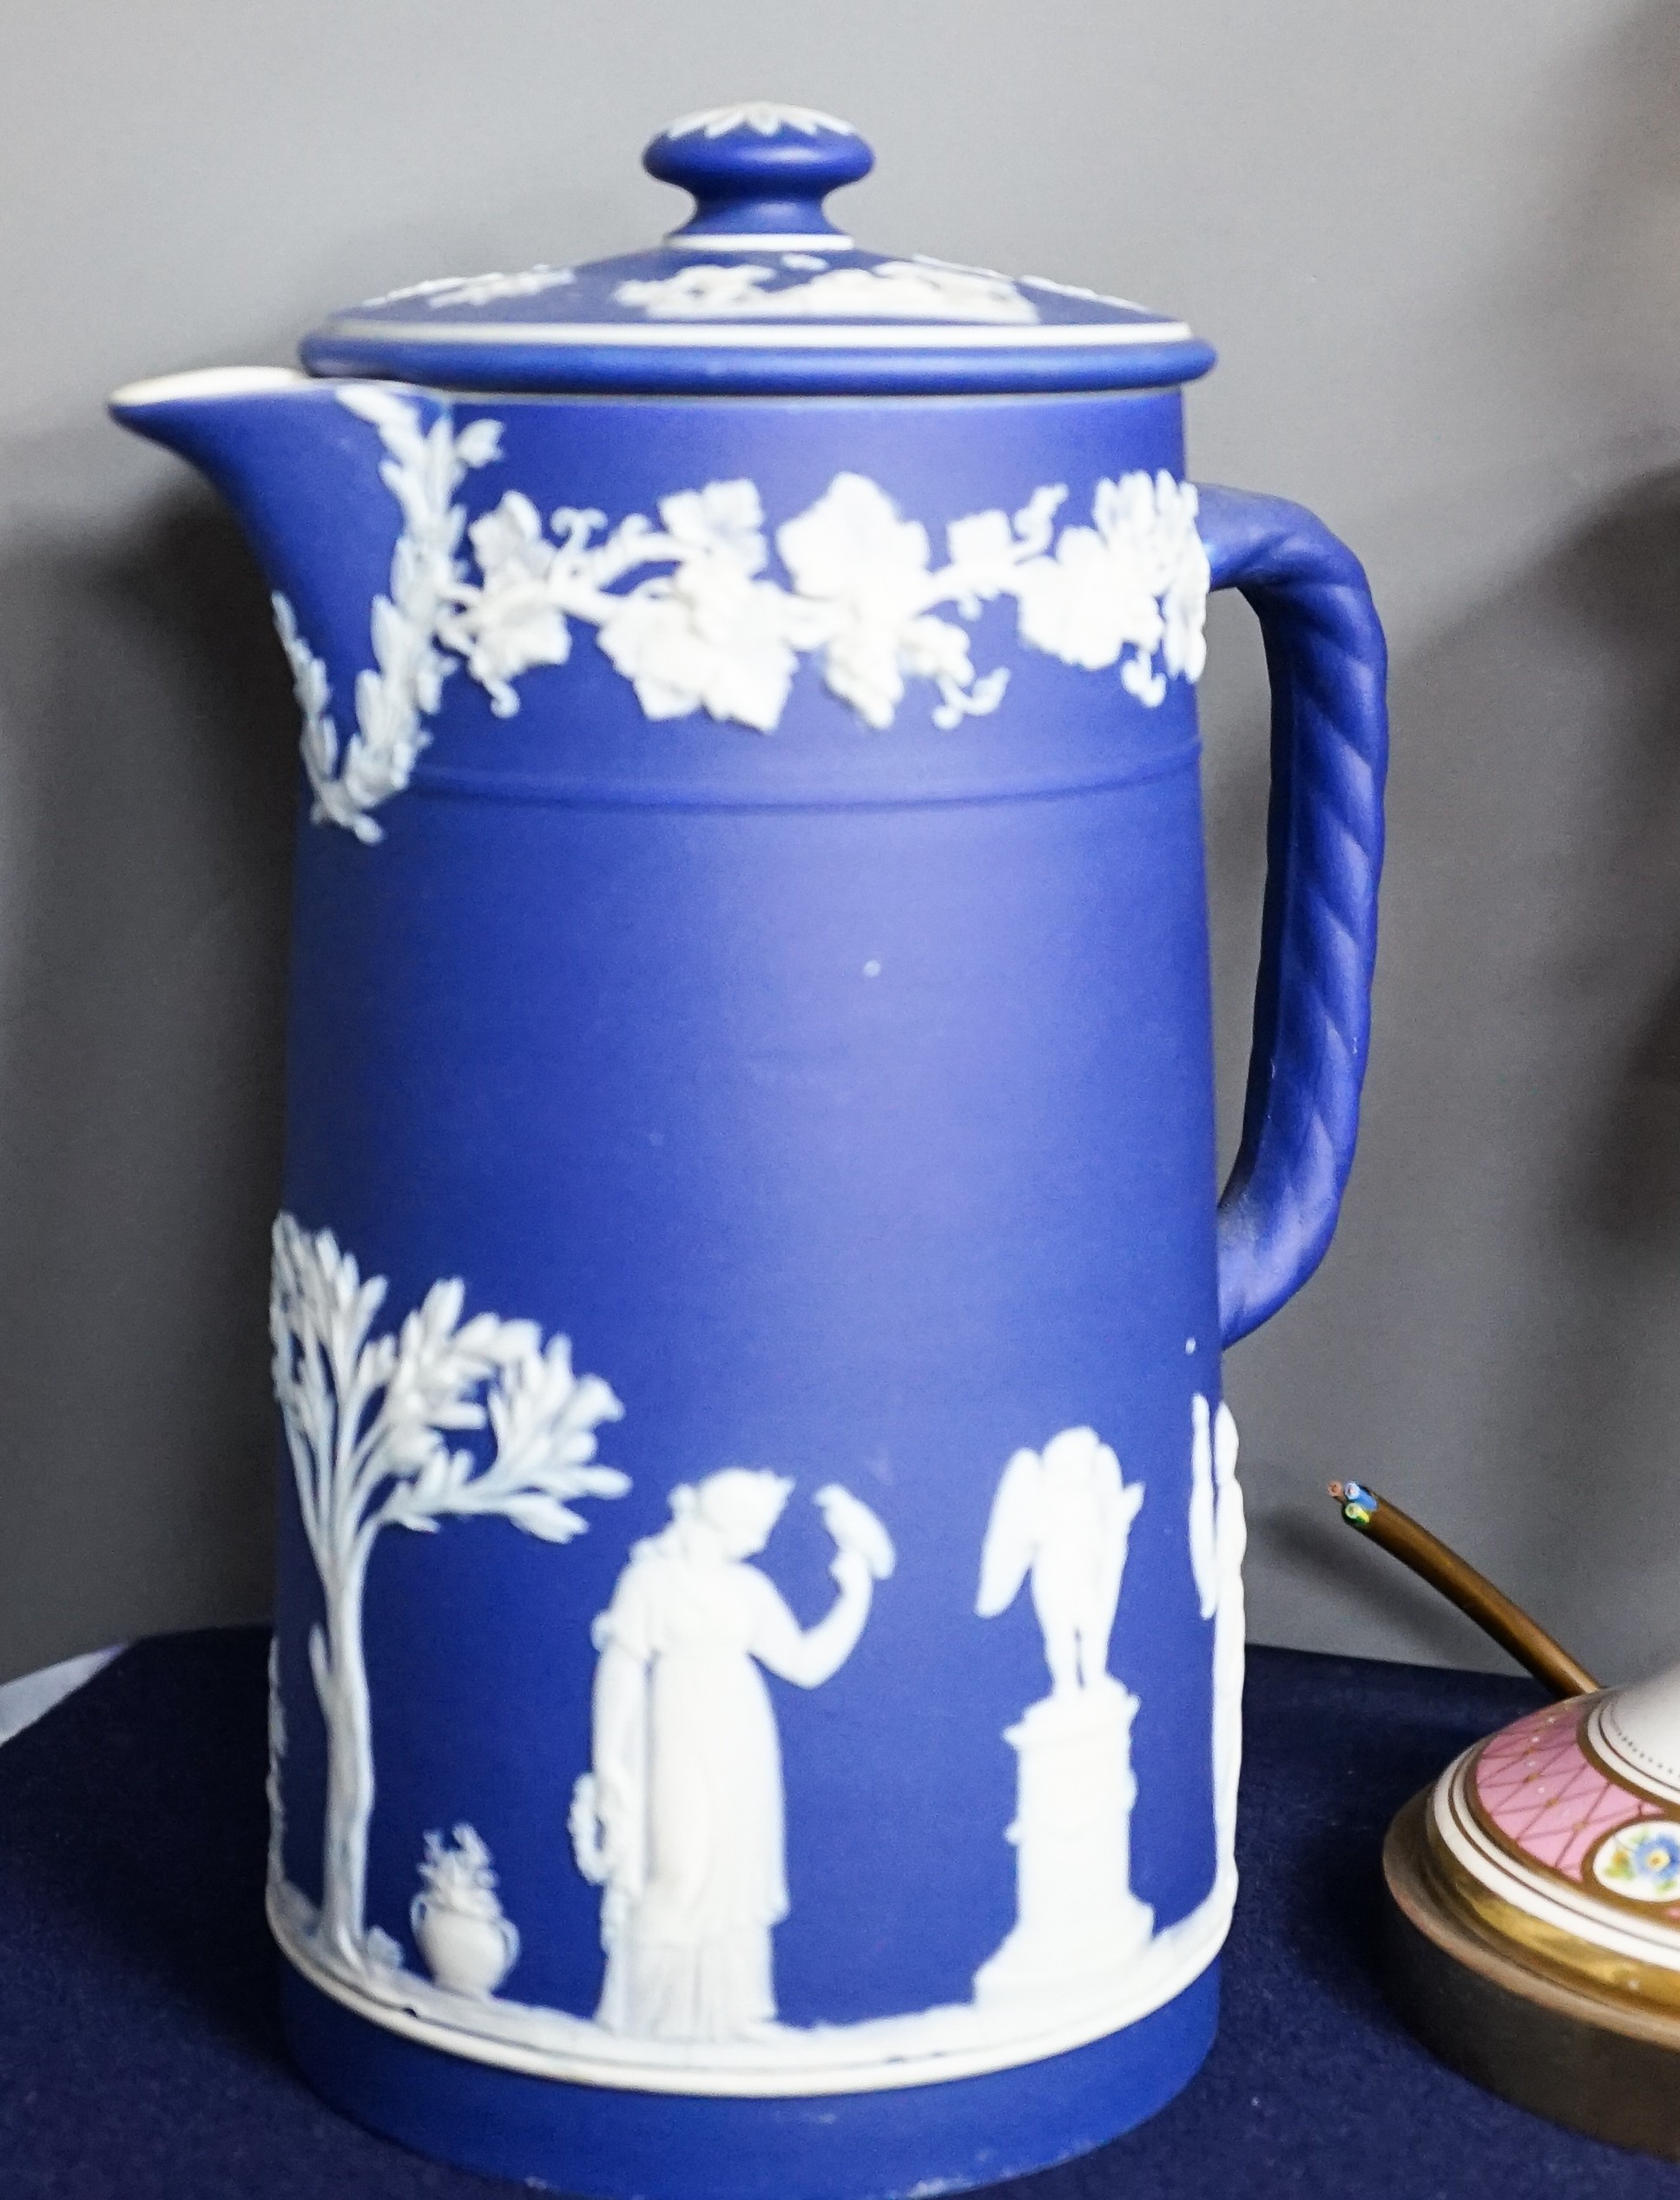 Three mid to late 19th century pieces of Wedgwood Jasperware, including a coffee pot and a small cashe-pot, a pair of 19th century porcelain candlesticks converted into lamps